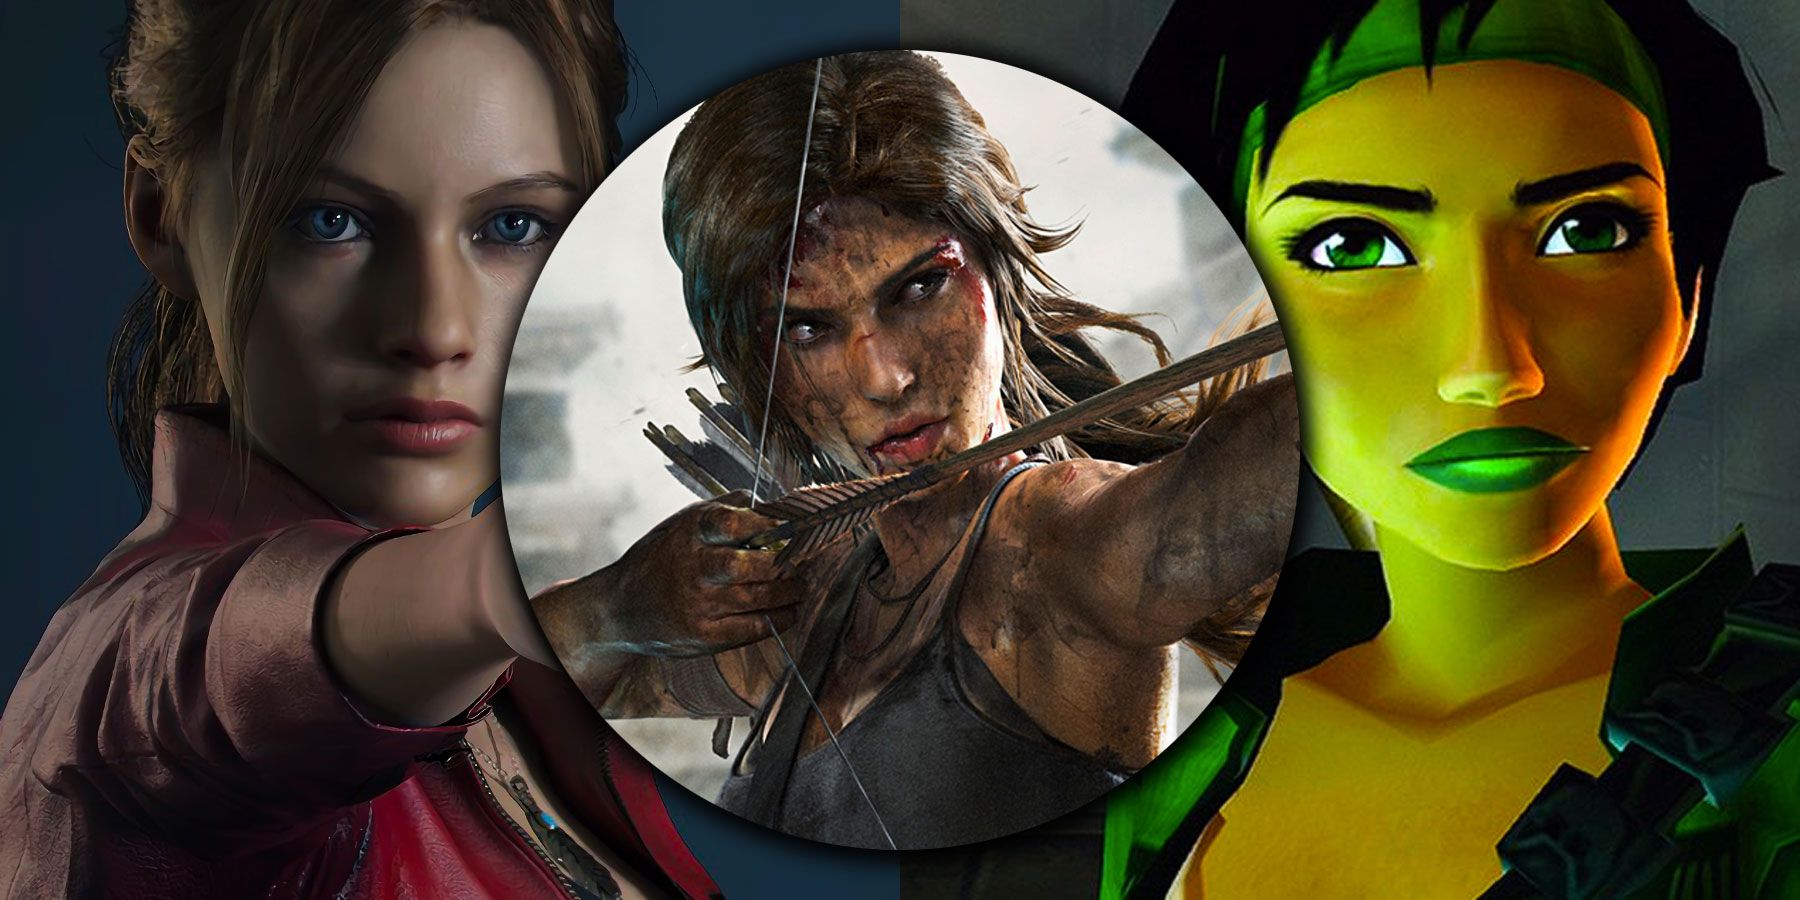 Claire Redfield from Resident Evil 2, Lara Croft, and Jade from Beyond Good And Evil collage image